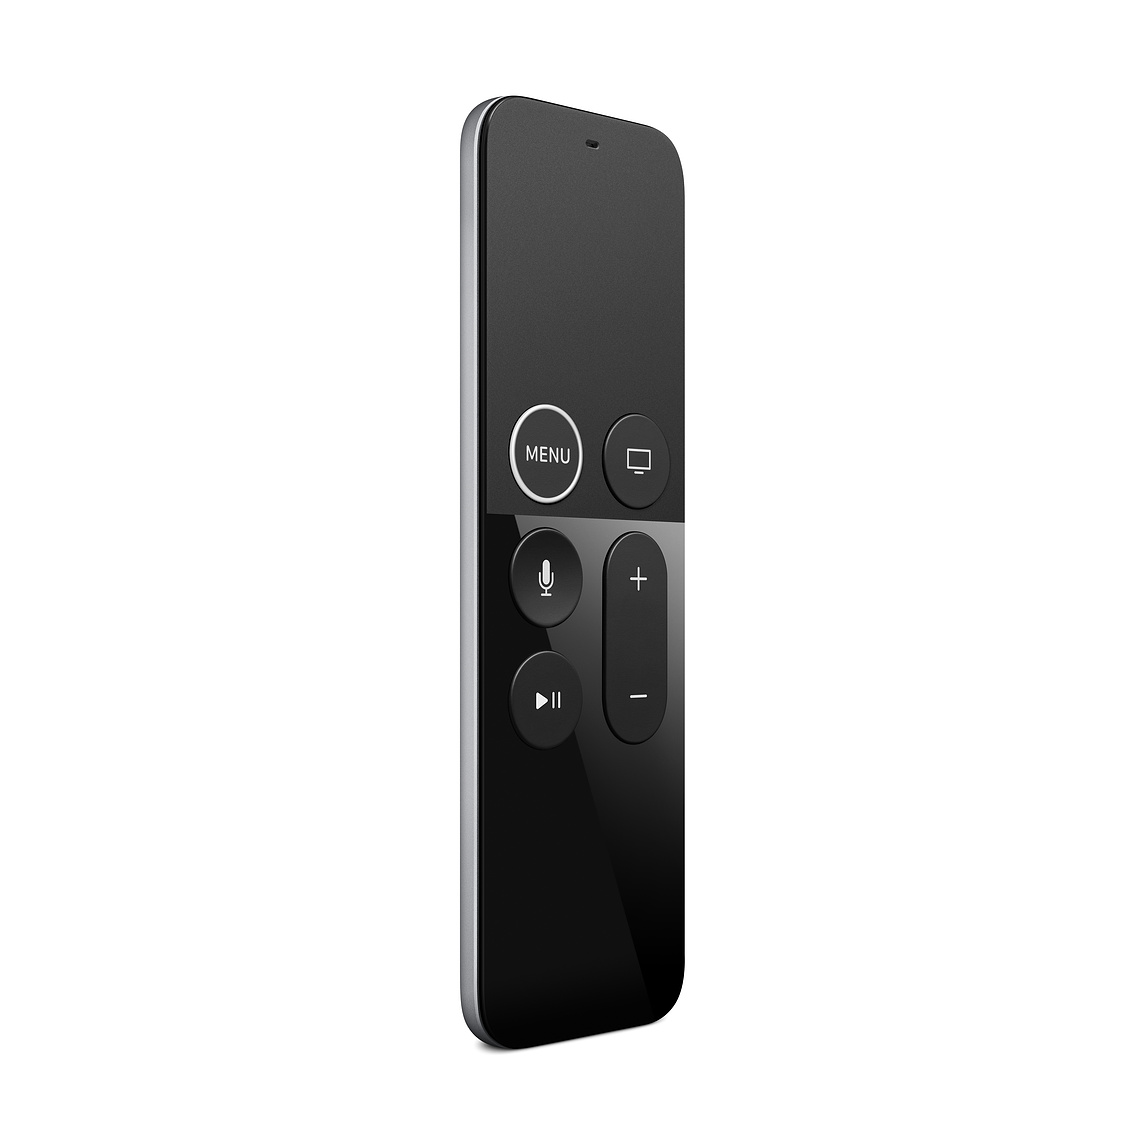 If the volume buttons on your Apple TV remote aren't working - Apple Support